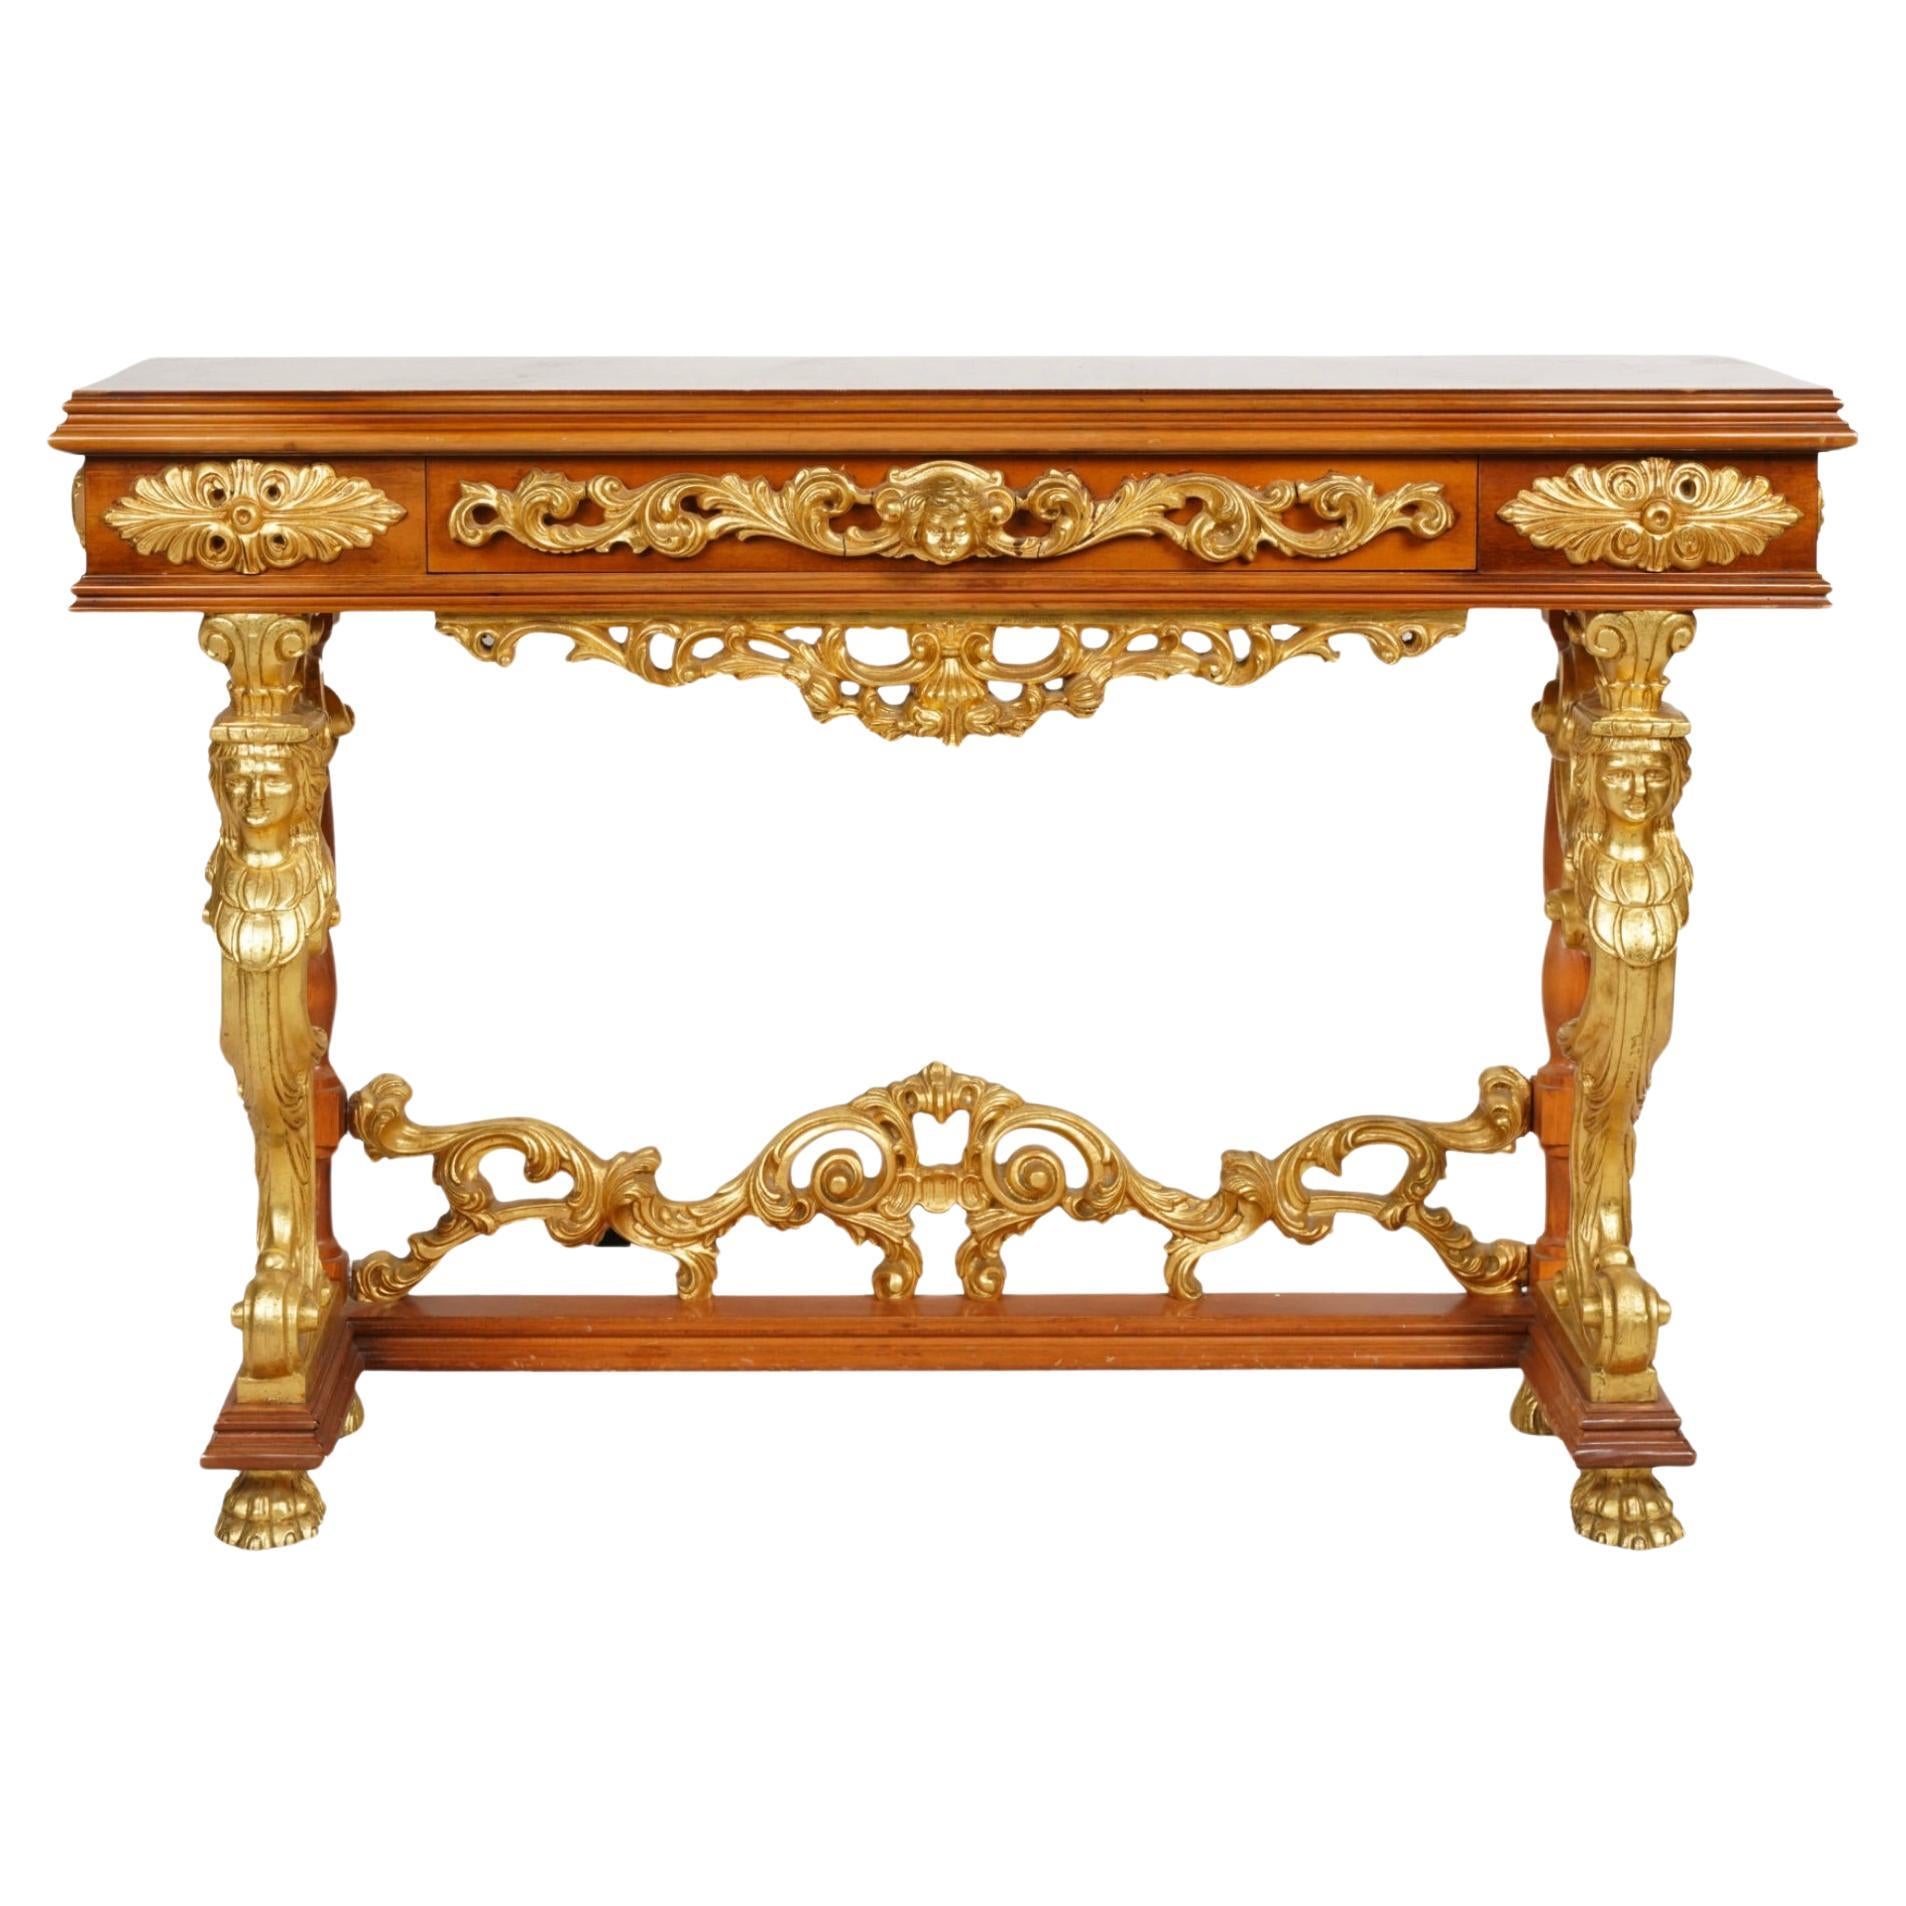 Antique Regency Style Giltwood & Mahogany Figural Console Table